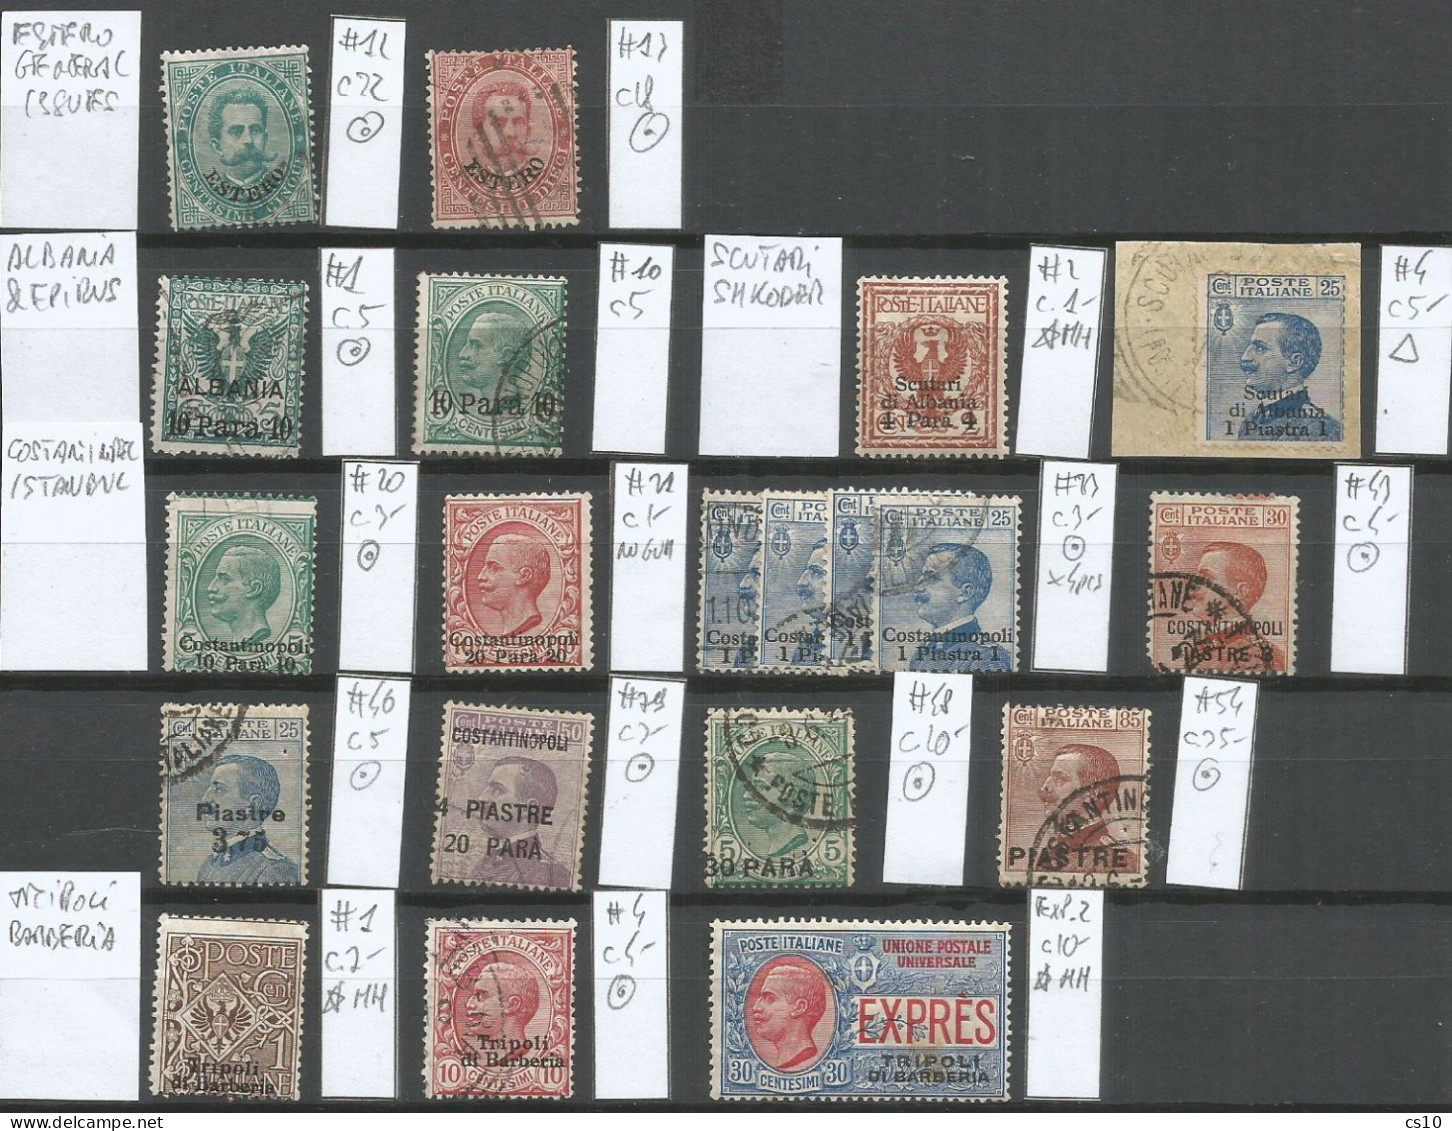 Italy Levante Levant Issues Small Lot Of Used/MH Stamps : Albania Epirus Scutari Costantinopel Tripoli Barberia - Emissions Générales